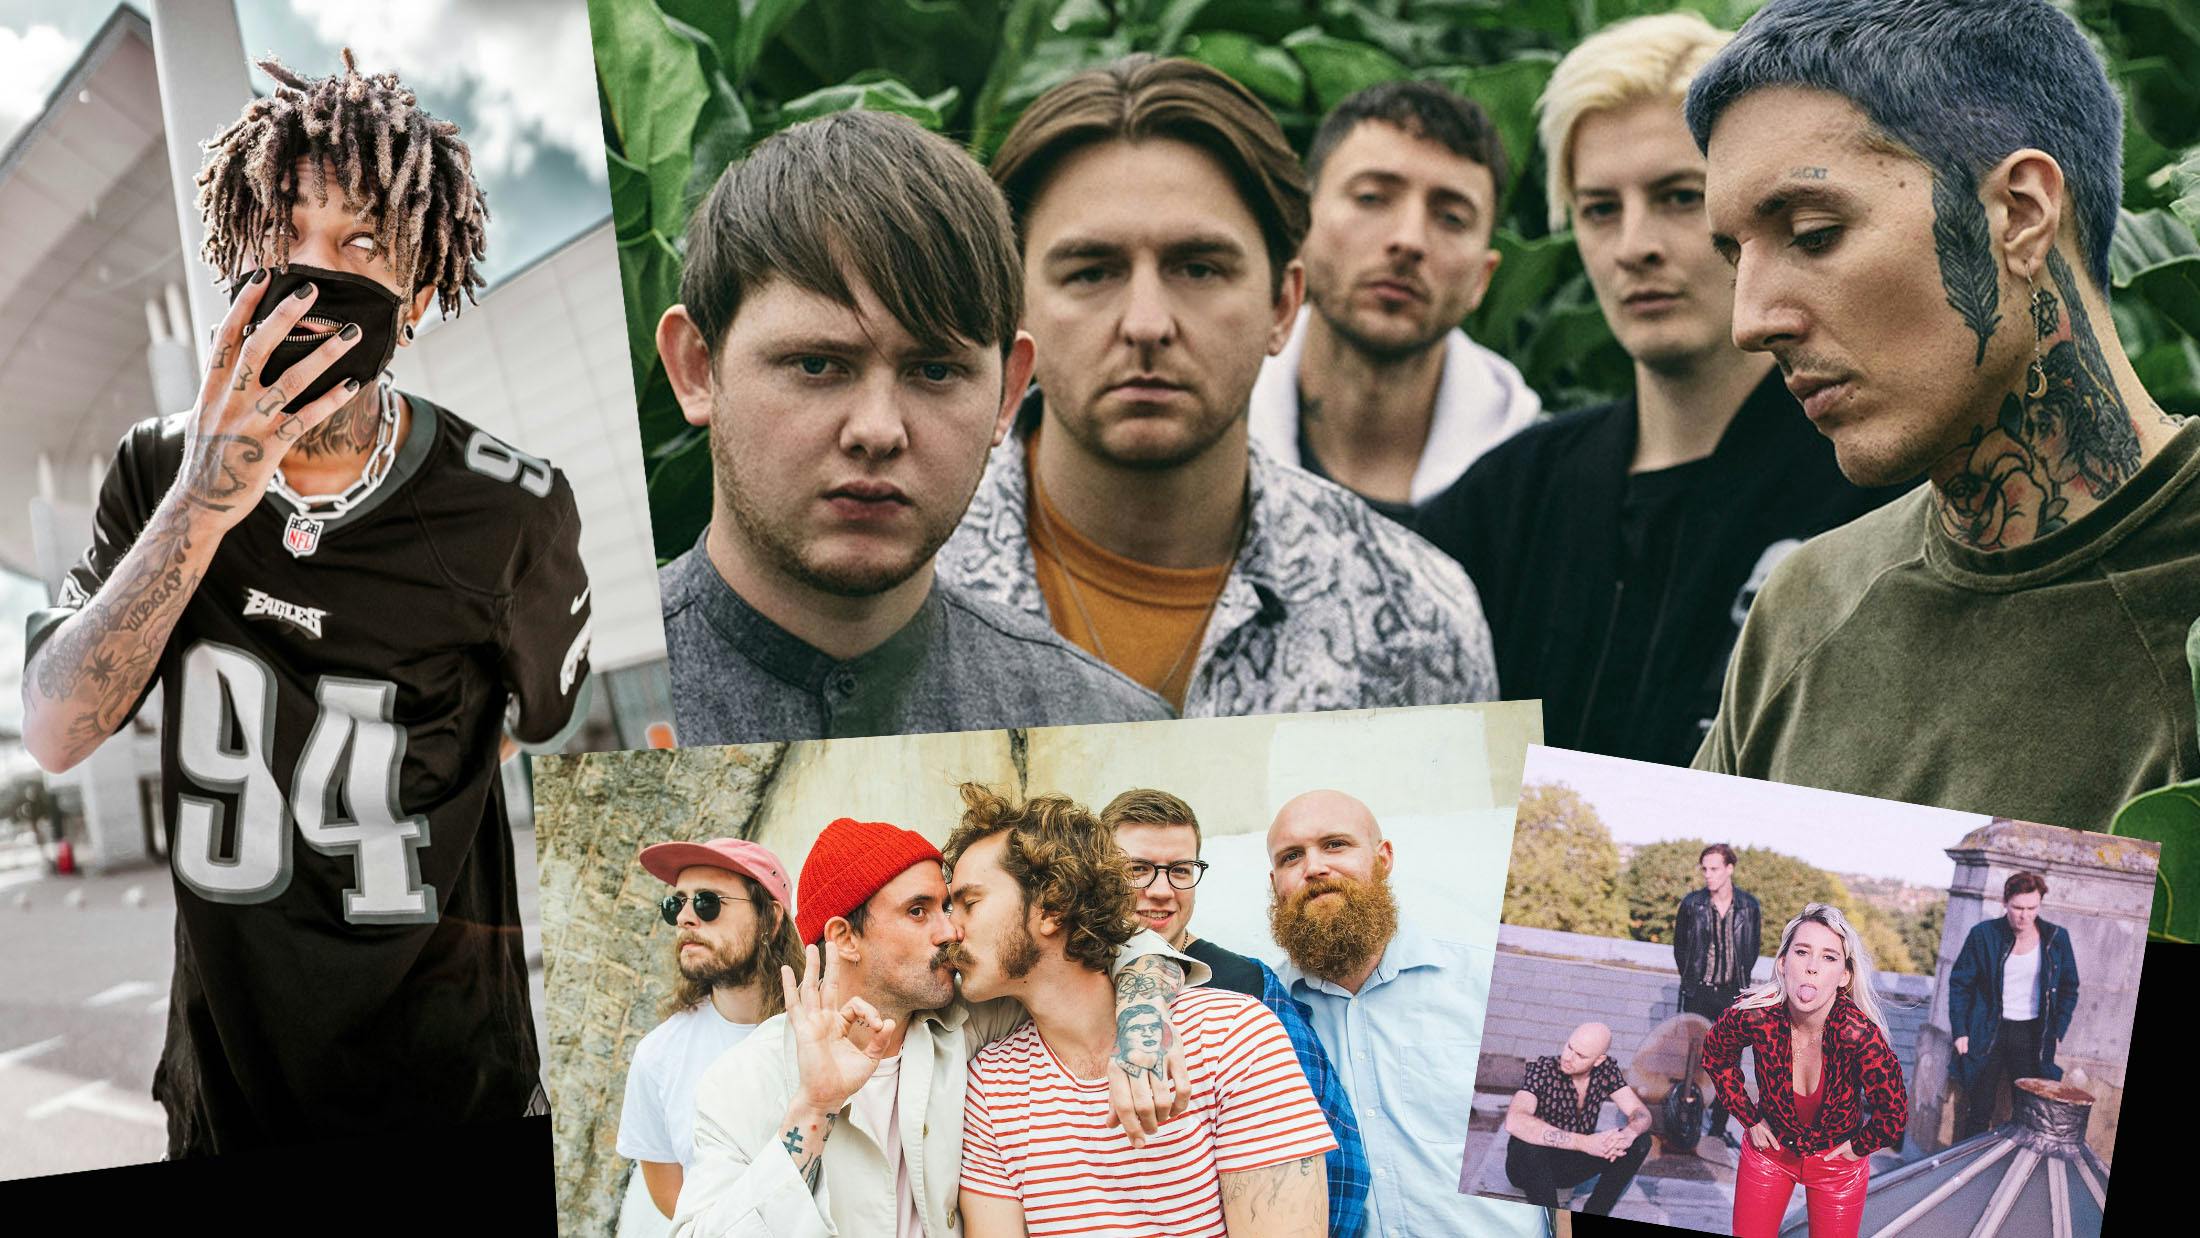 Listen To Bring Me The Horizon's All Points East Playlist